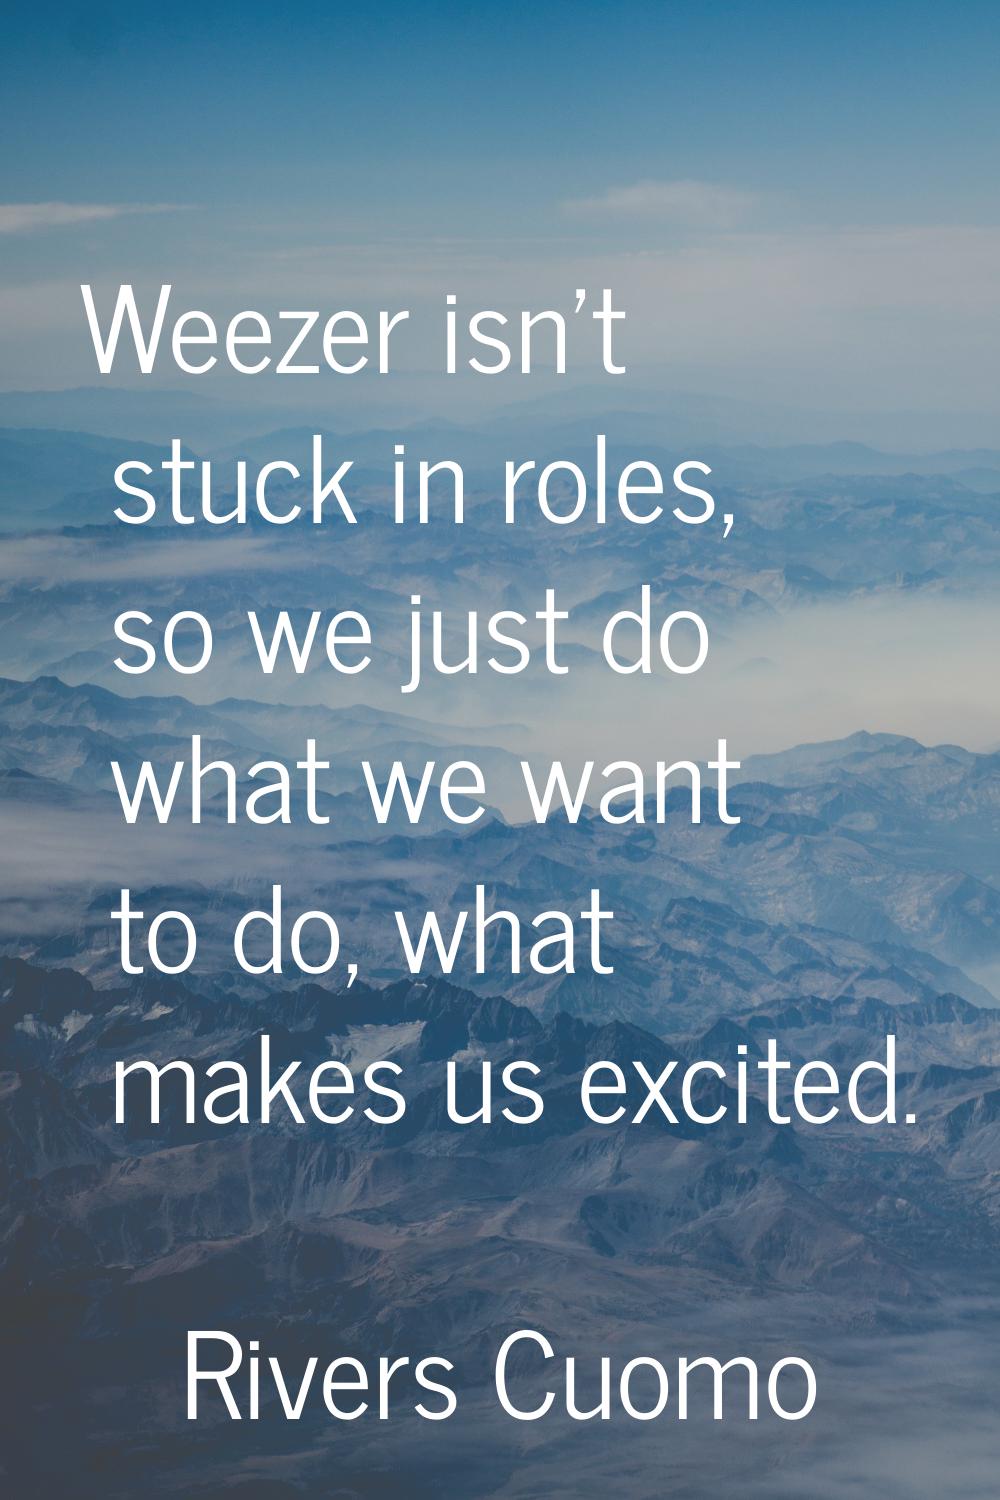 Weezer isn't stuck in roles, so we just do what we want to do, what makes us excited.